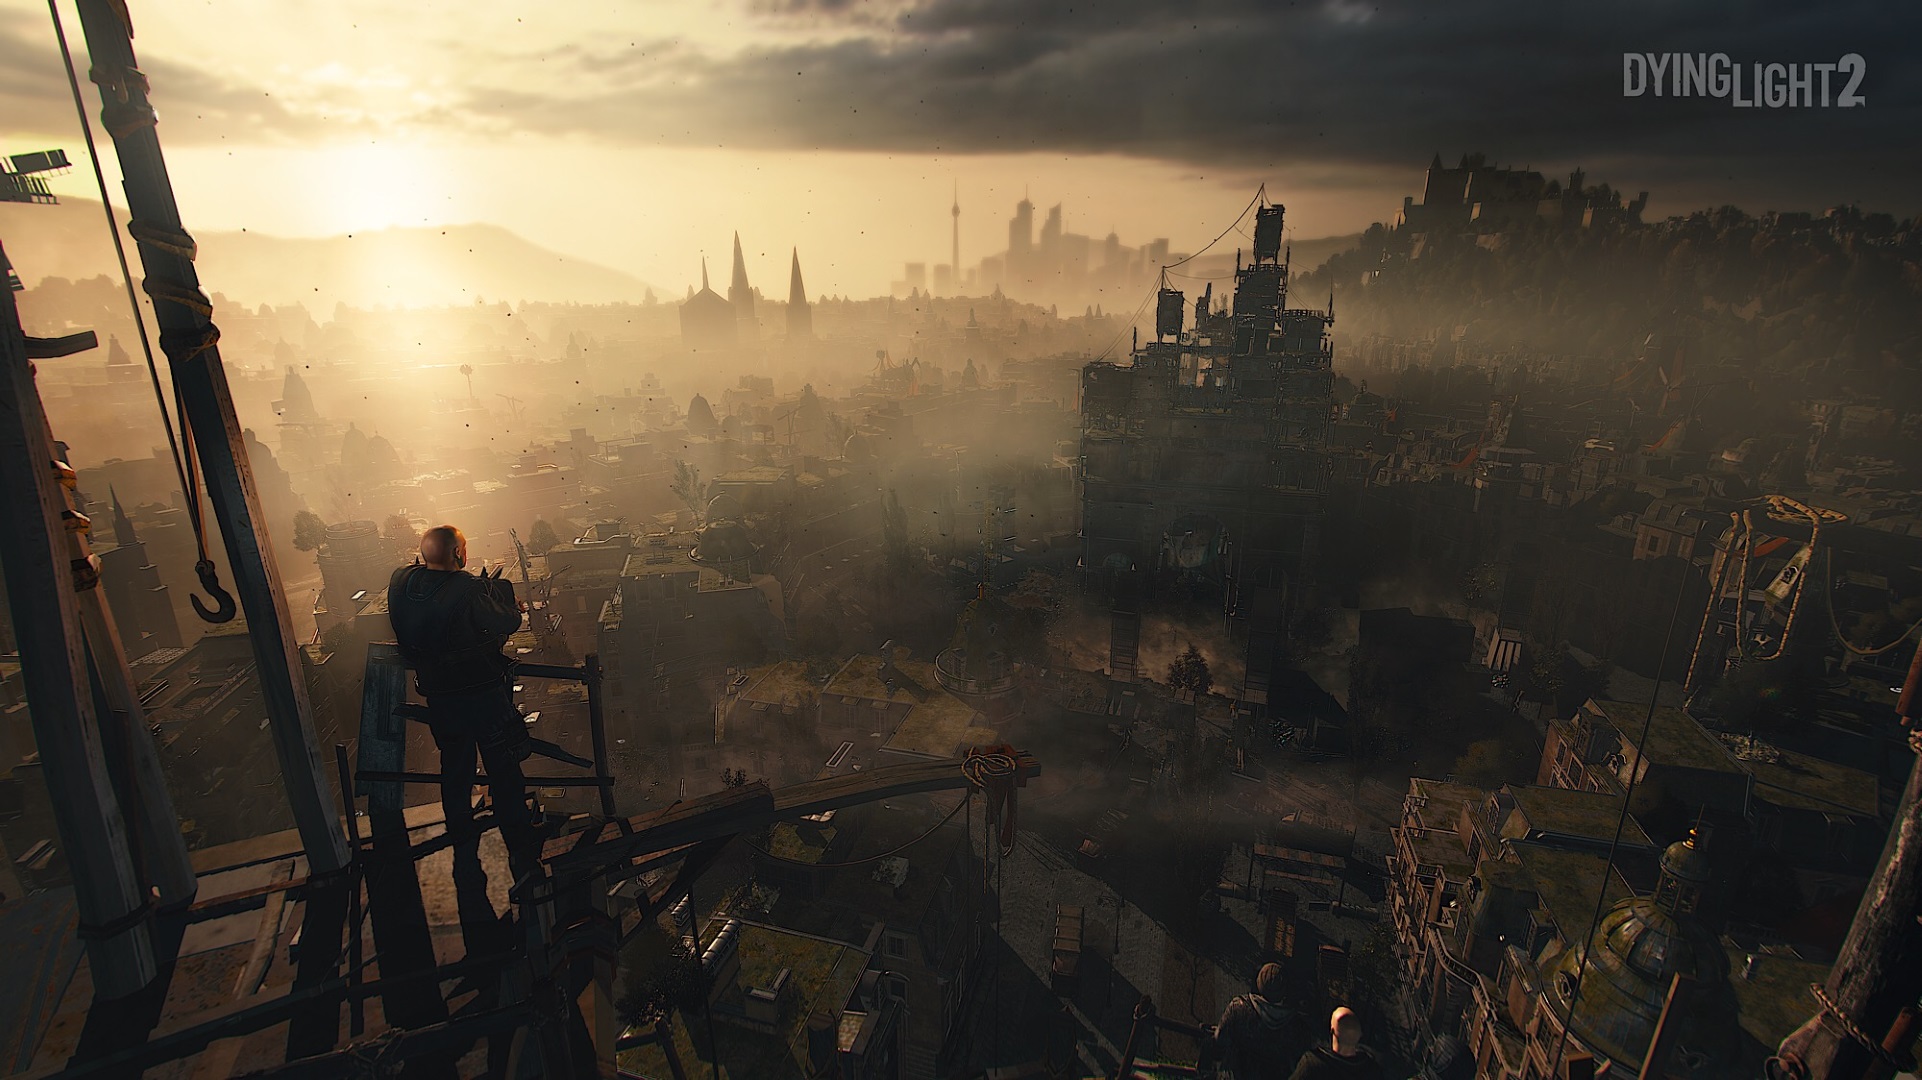 Dying Light 2 release date delayed - all the latest ...